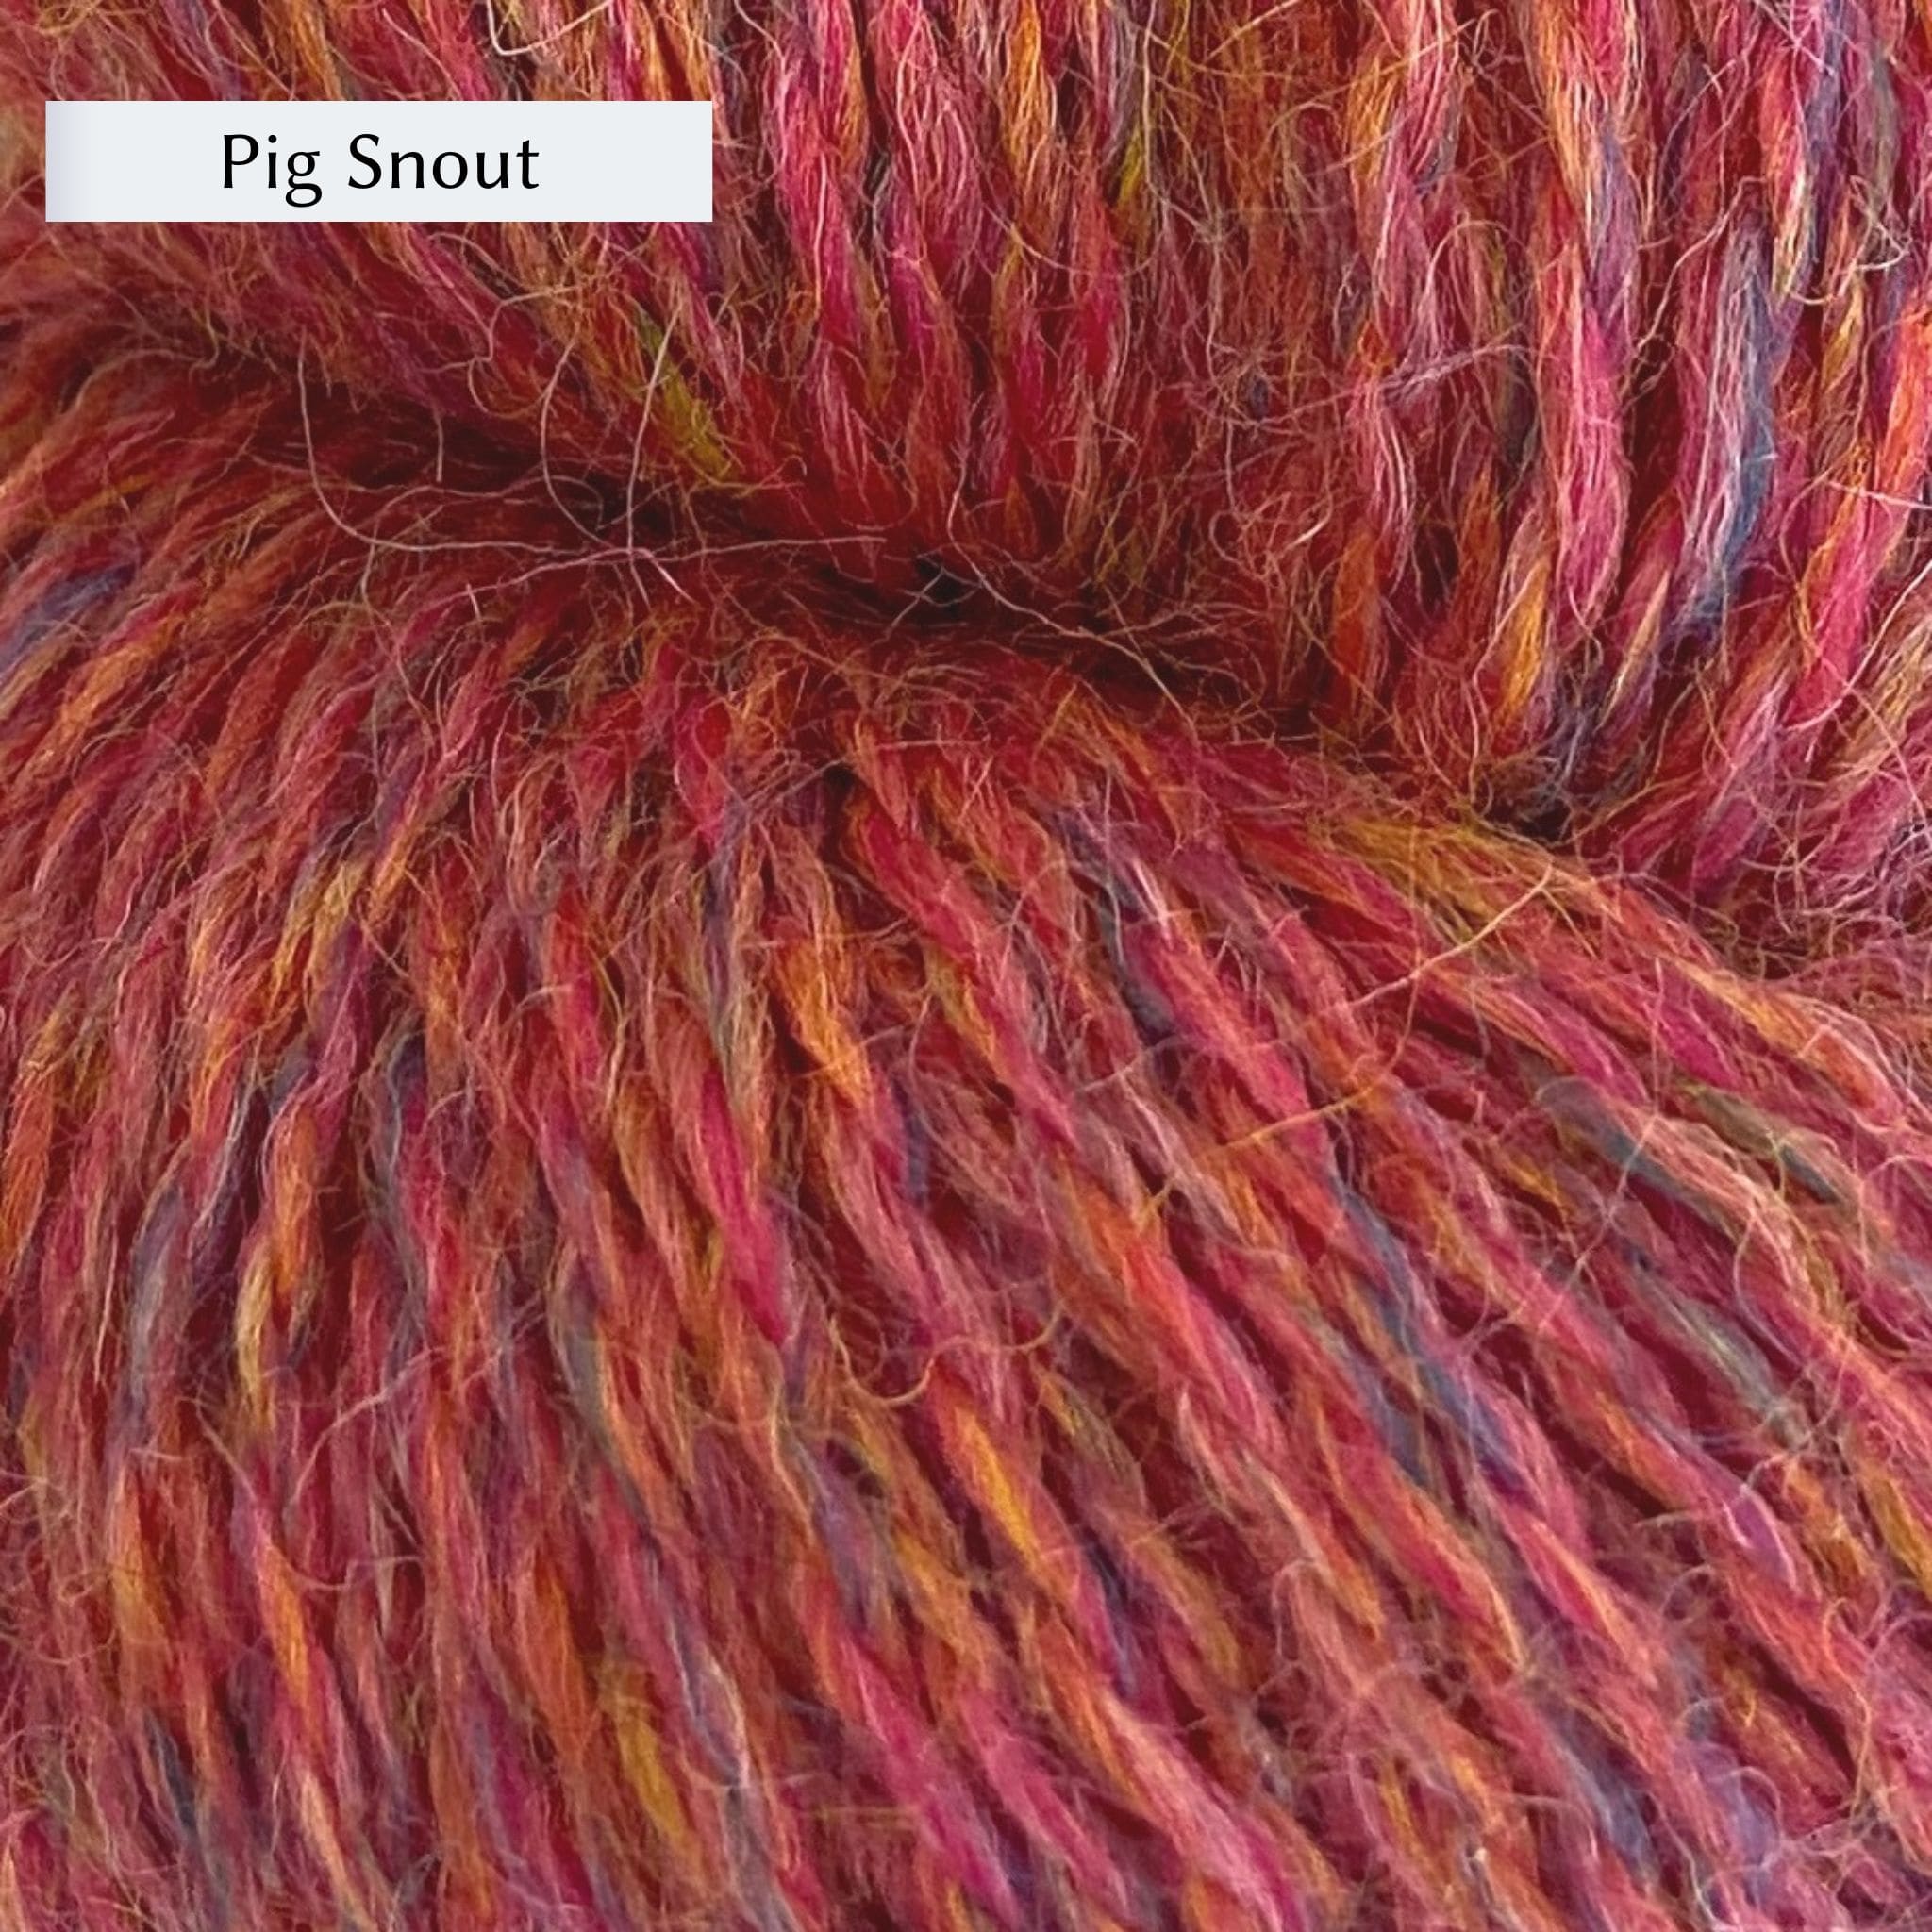 John Arbon Appledore DK, a DK weight British yarn, in color Pig Snout, a bright red with yellow and blue heathering